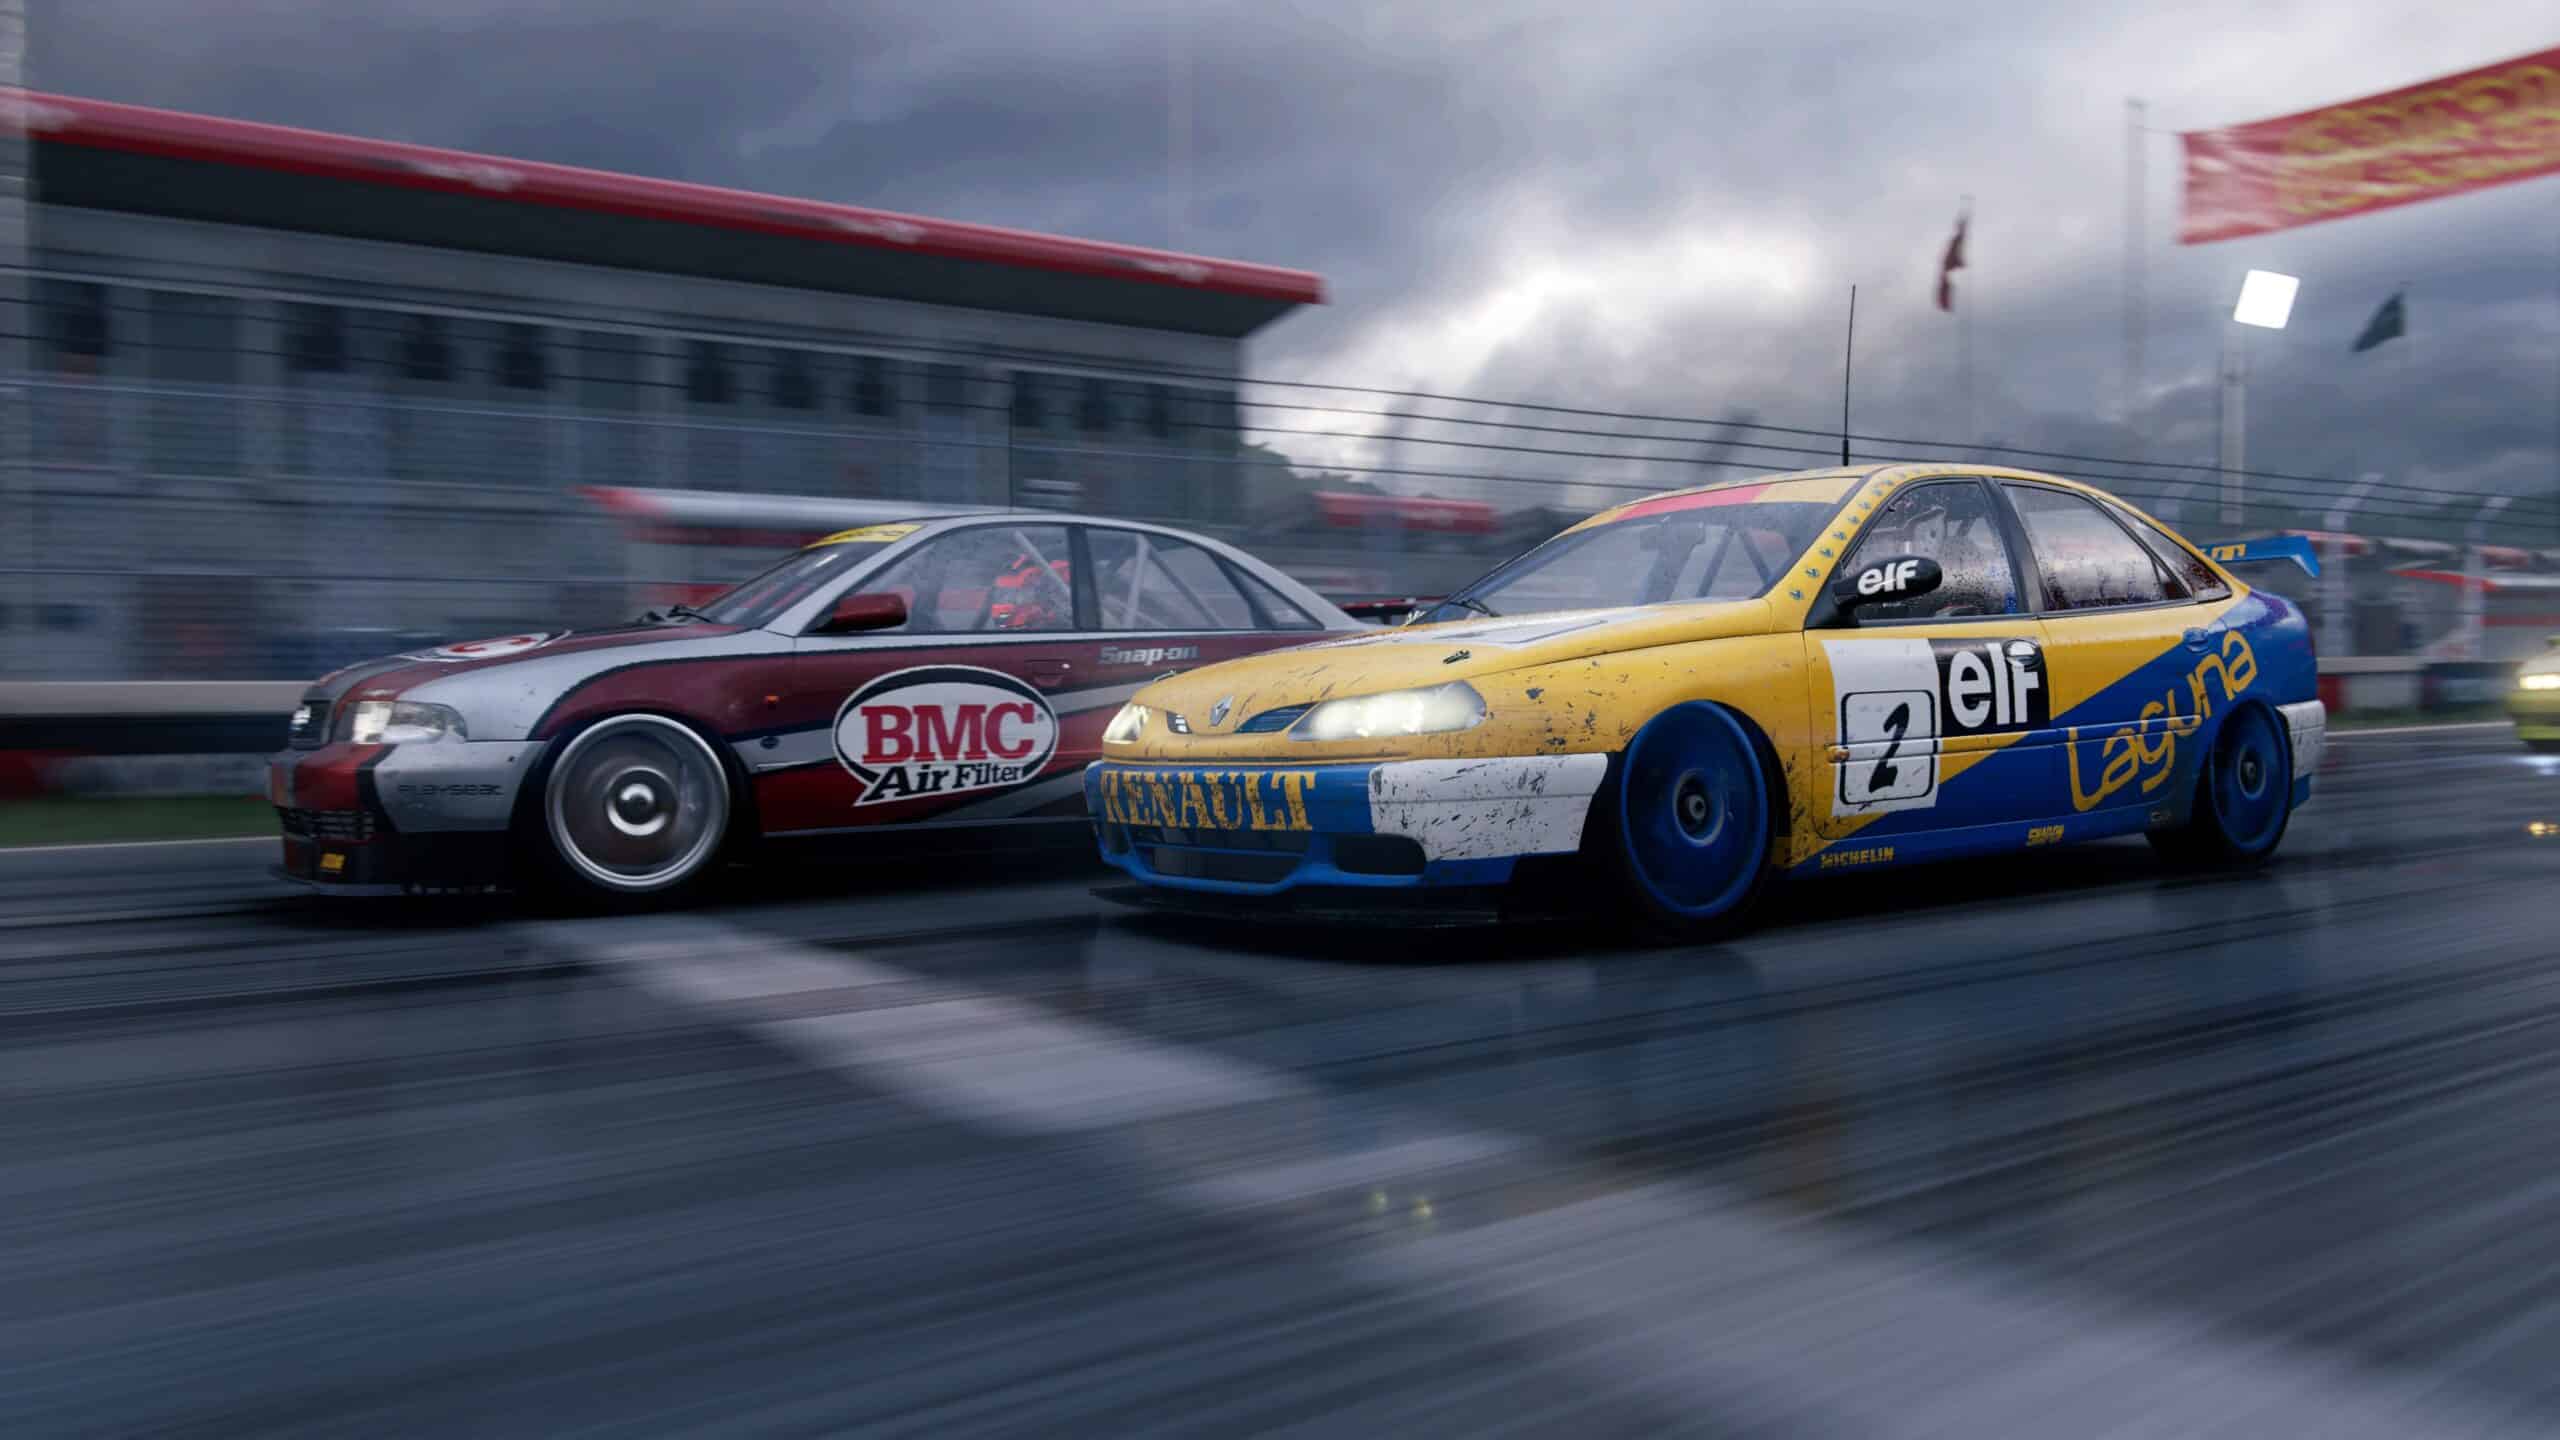 Touring Car Legends Wallpapers